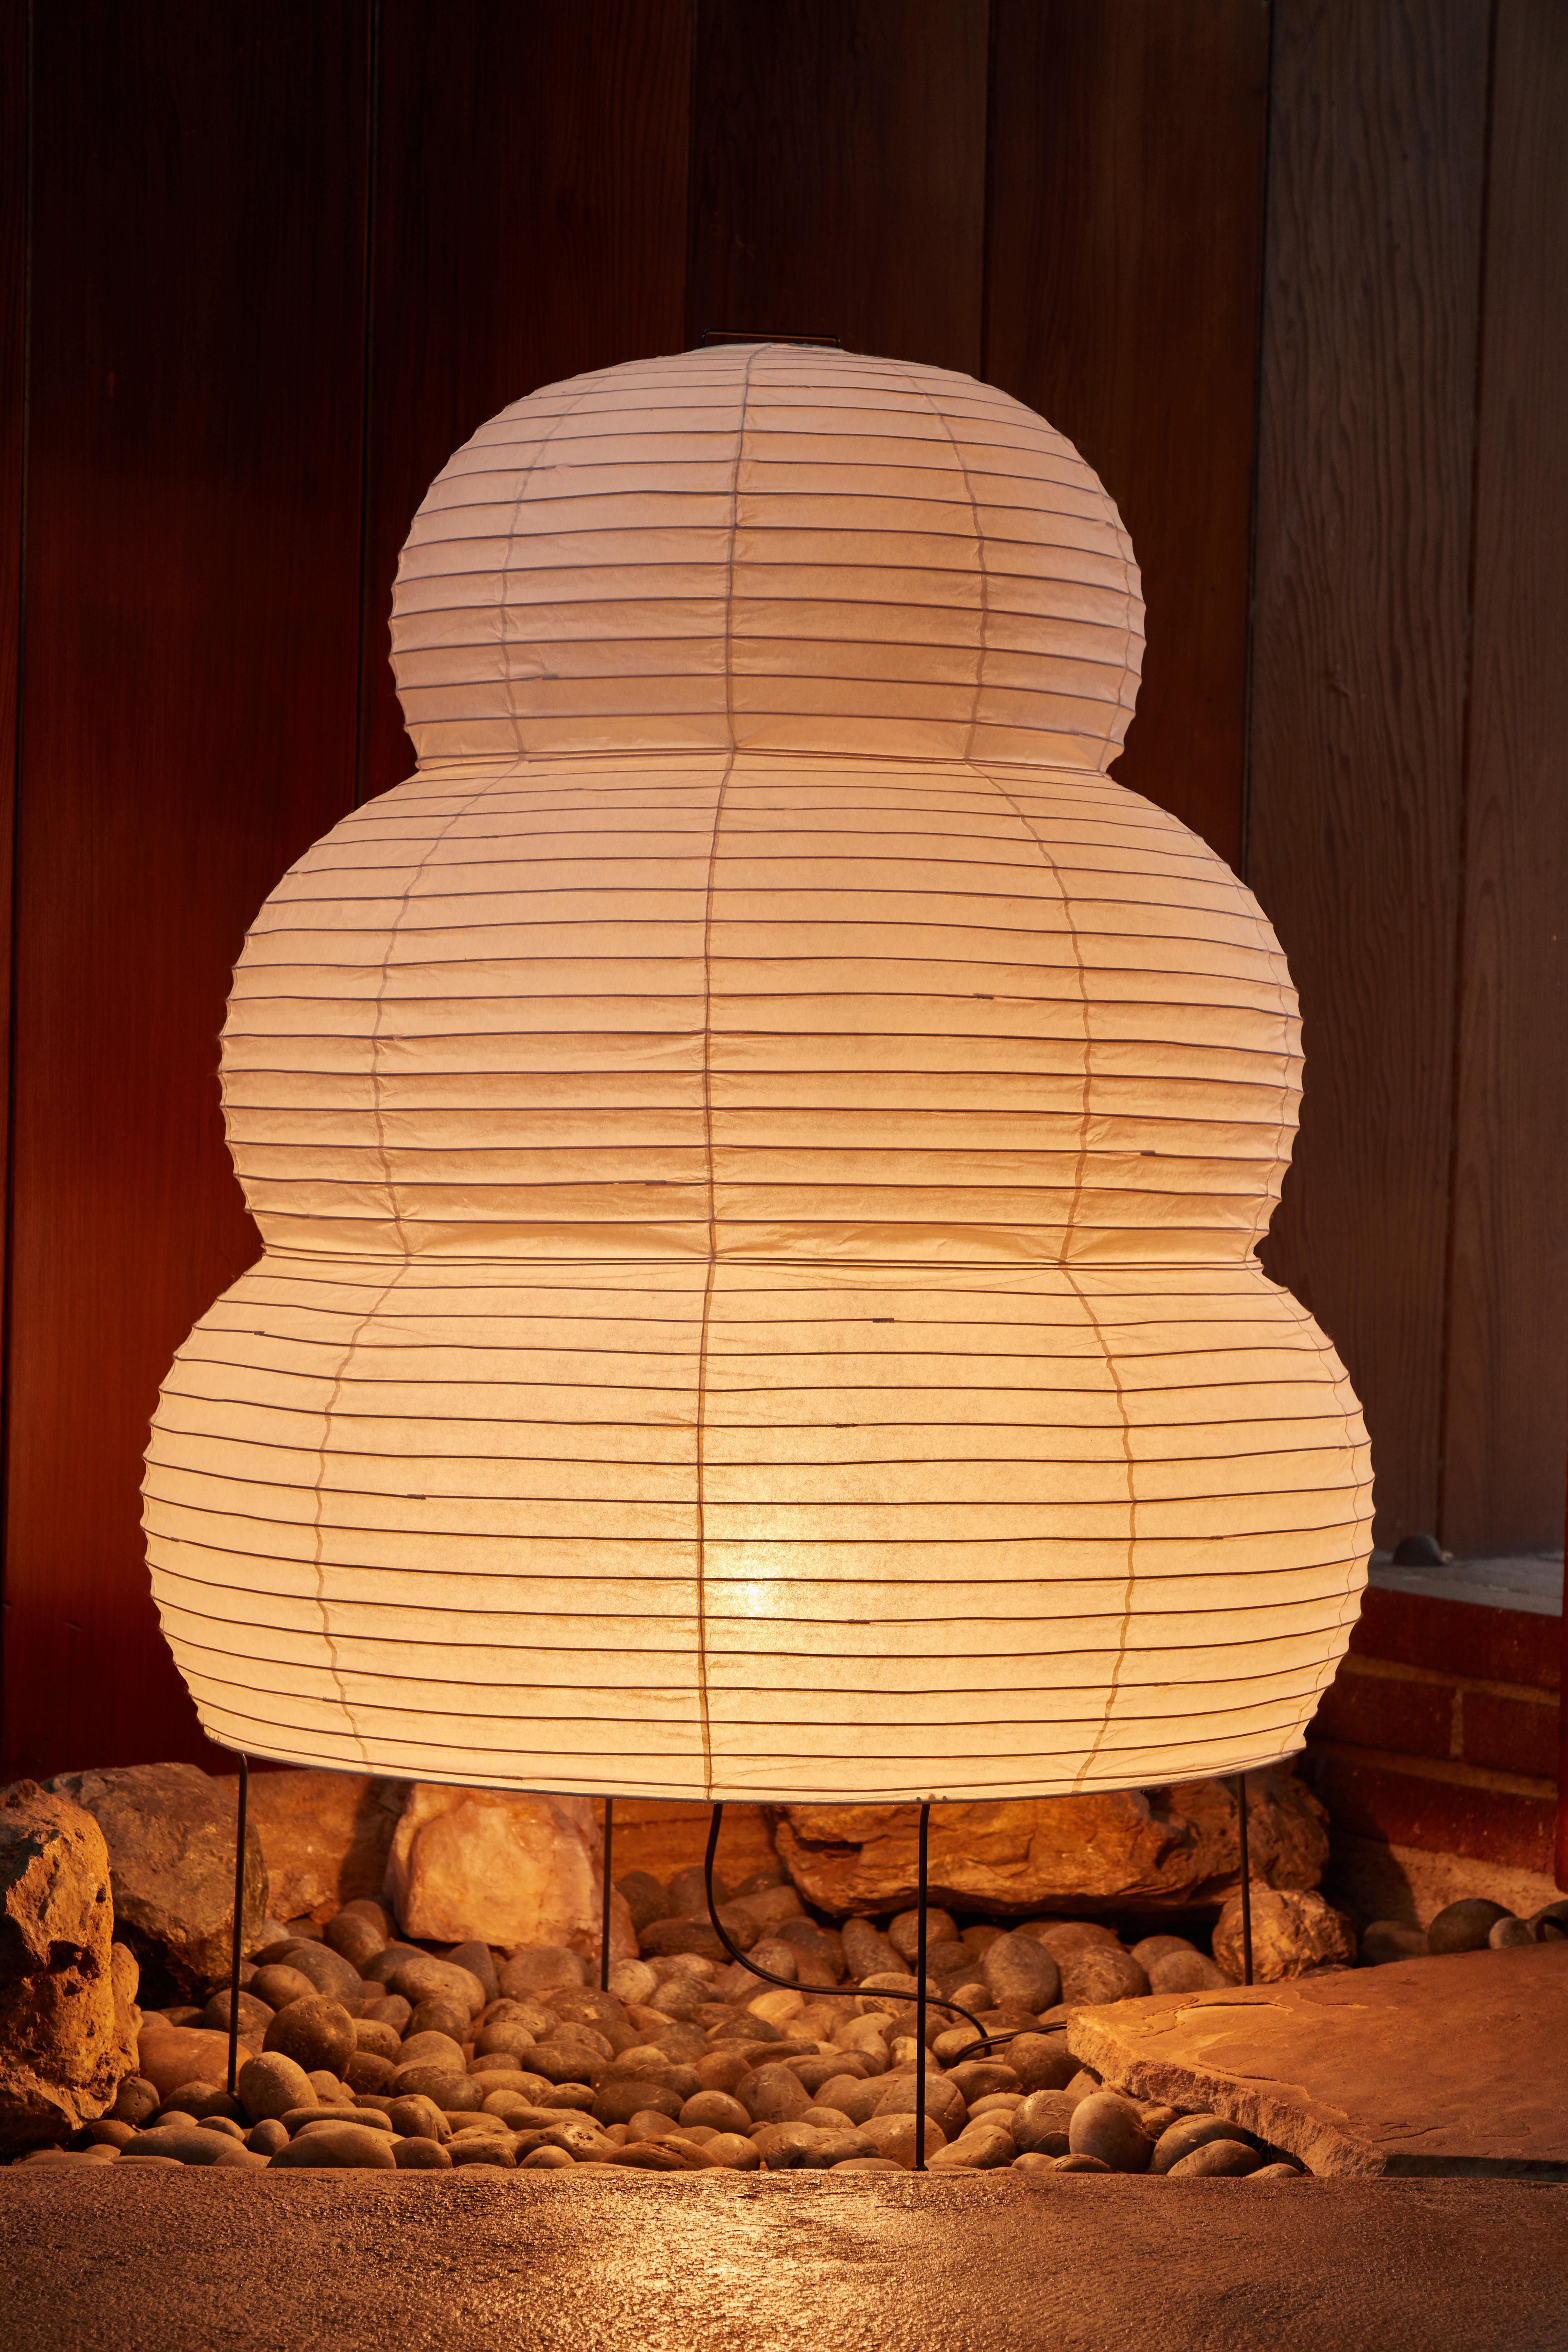 Monumental Isamu Noguchi Akari 25N floor lamp. The shade is made from handmade washi paper and bamboo ribs with Noguchi Akari manufacturer's stamp. Akari light sculptures by Isamu Noguchi are considered icons of 1950s modern design. Designed by